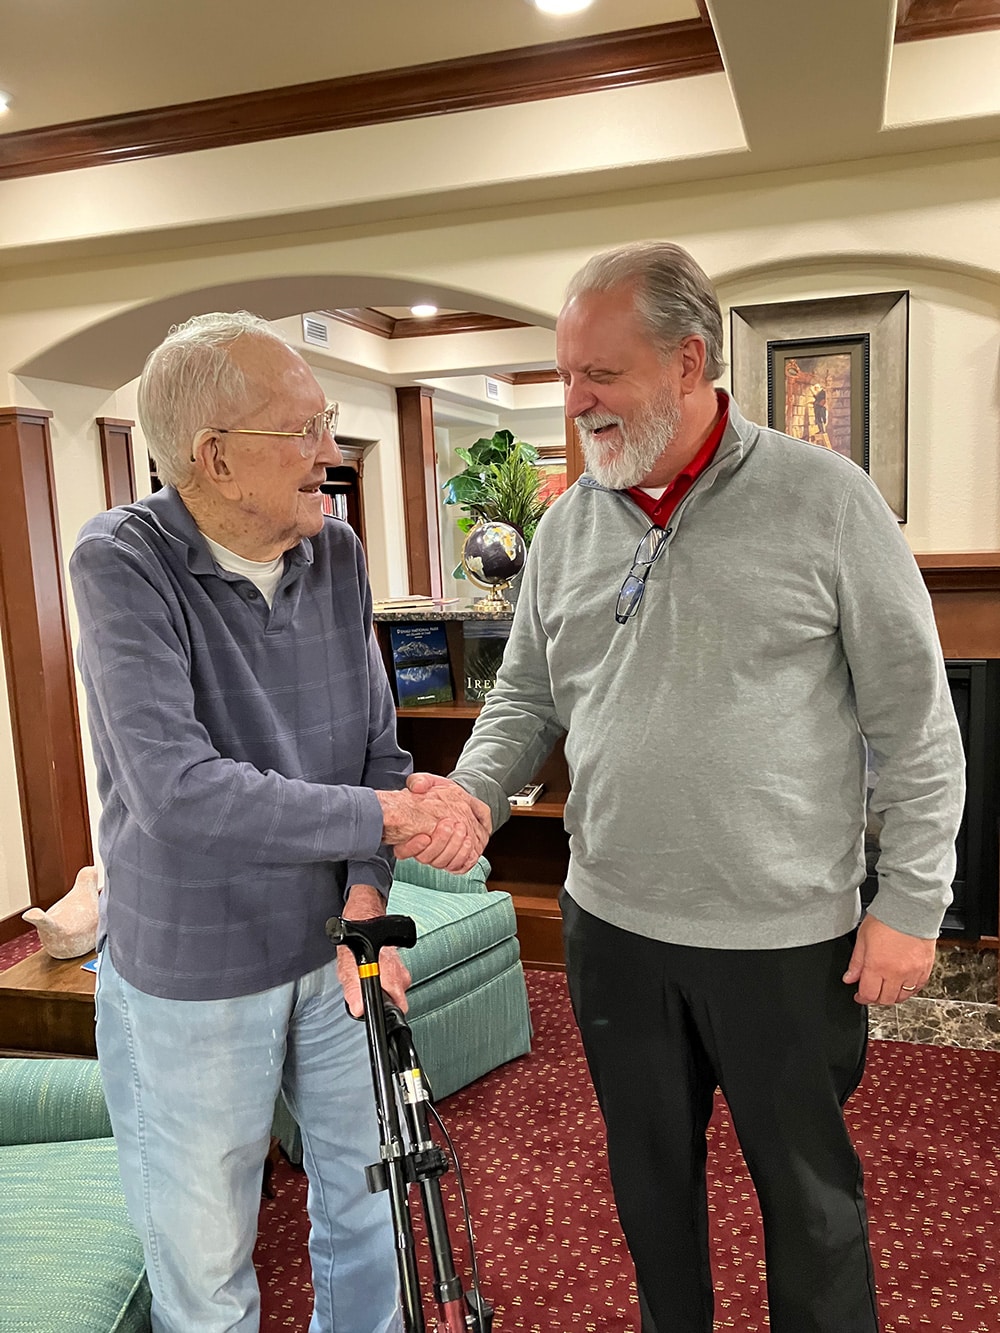 Bill is shown with Ken Malone, community sales manager for Linwood Estates Hawthorn Senior Living, located at 1611 Lawrenceville-Suwanee Rd. in Lawrenceville, Ga.